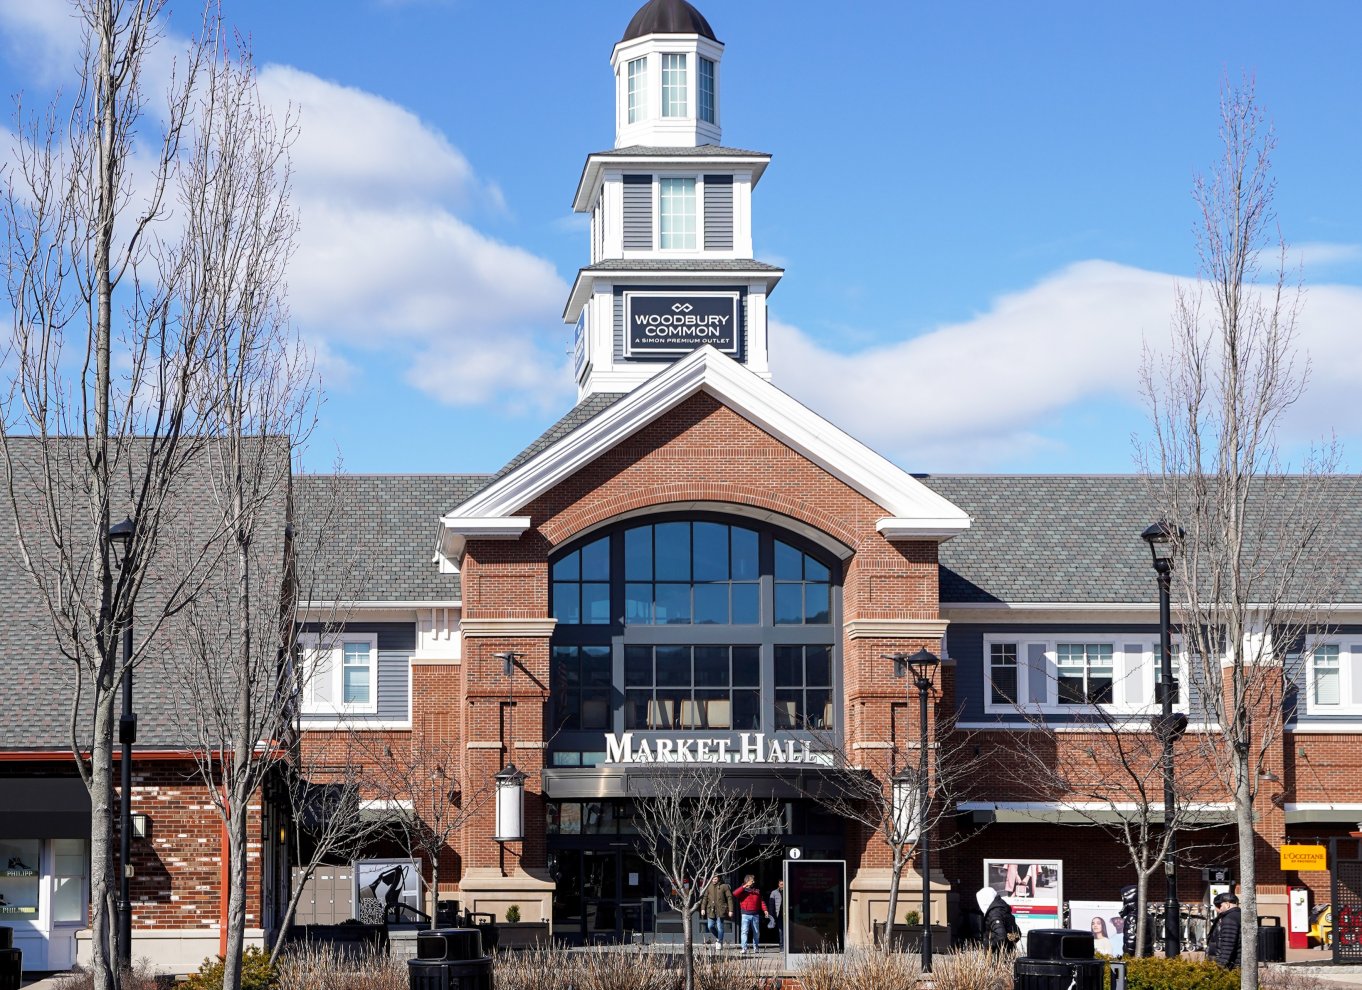 Woodbury Common Premium Outlets: Roundtrip Transfers from New York